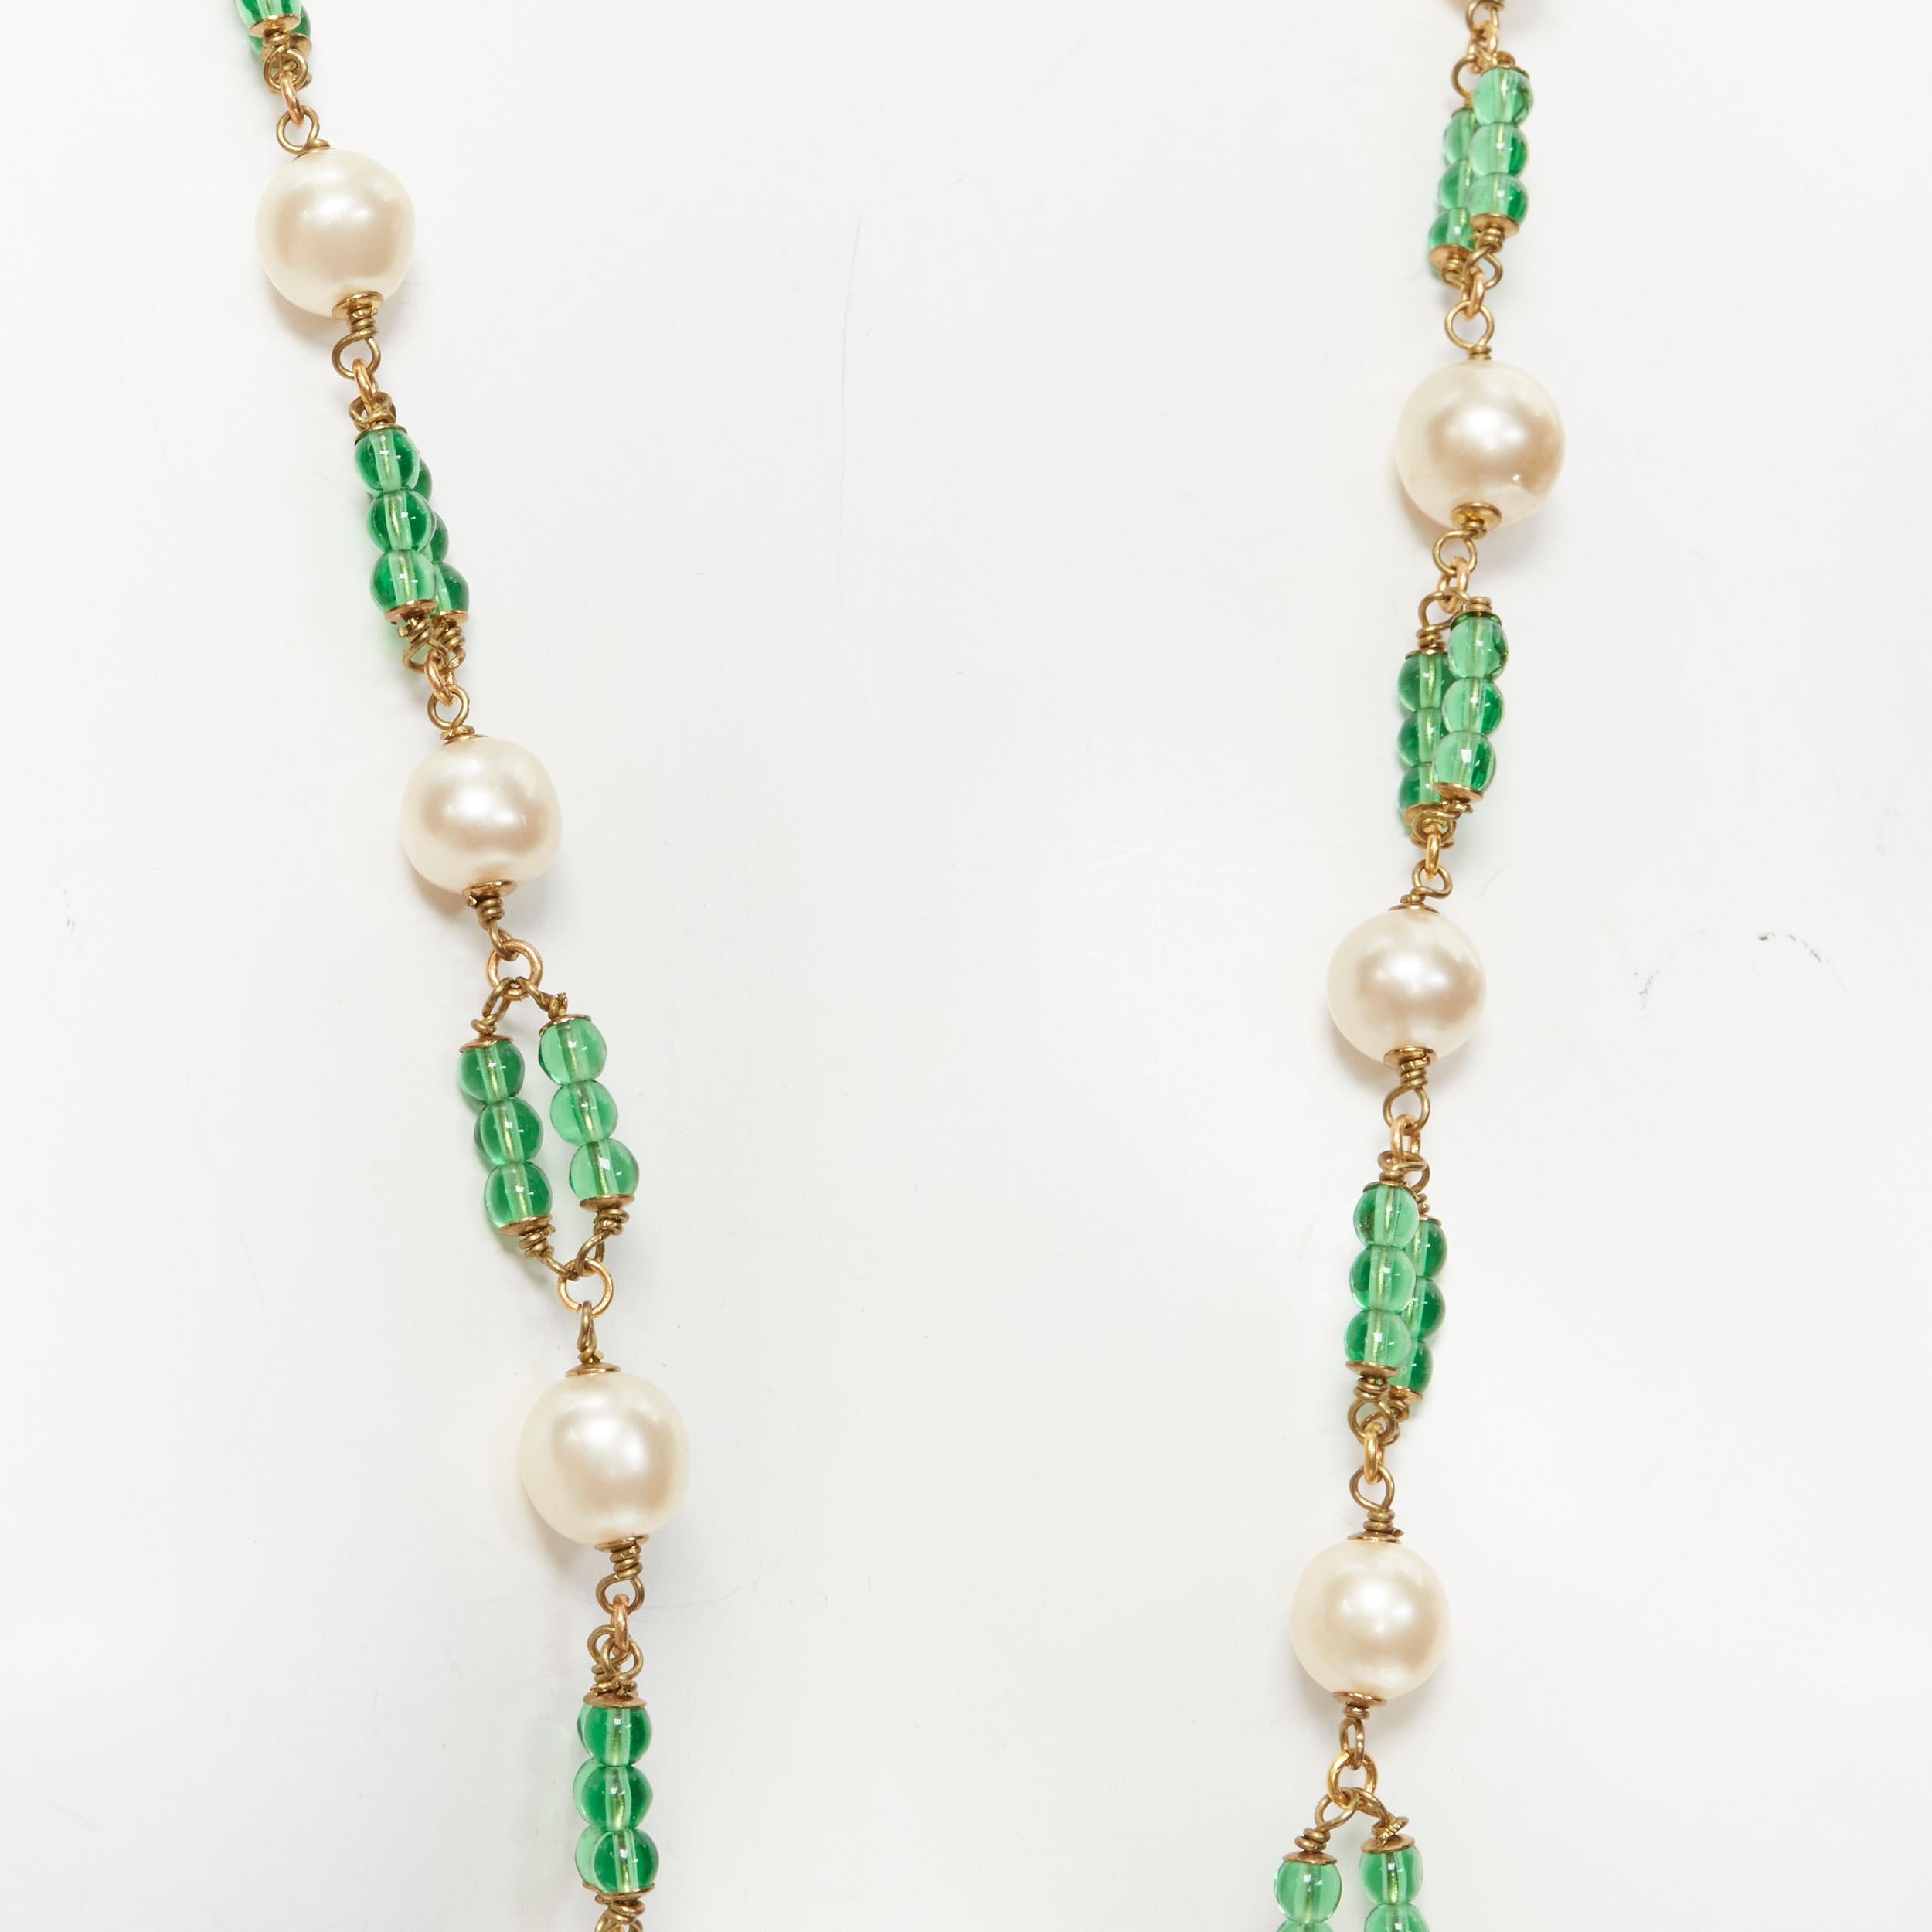 vintage CHANEL 93A green Gripoix poured glass beads faux Pearl sautoir necklace 1